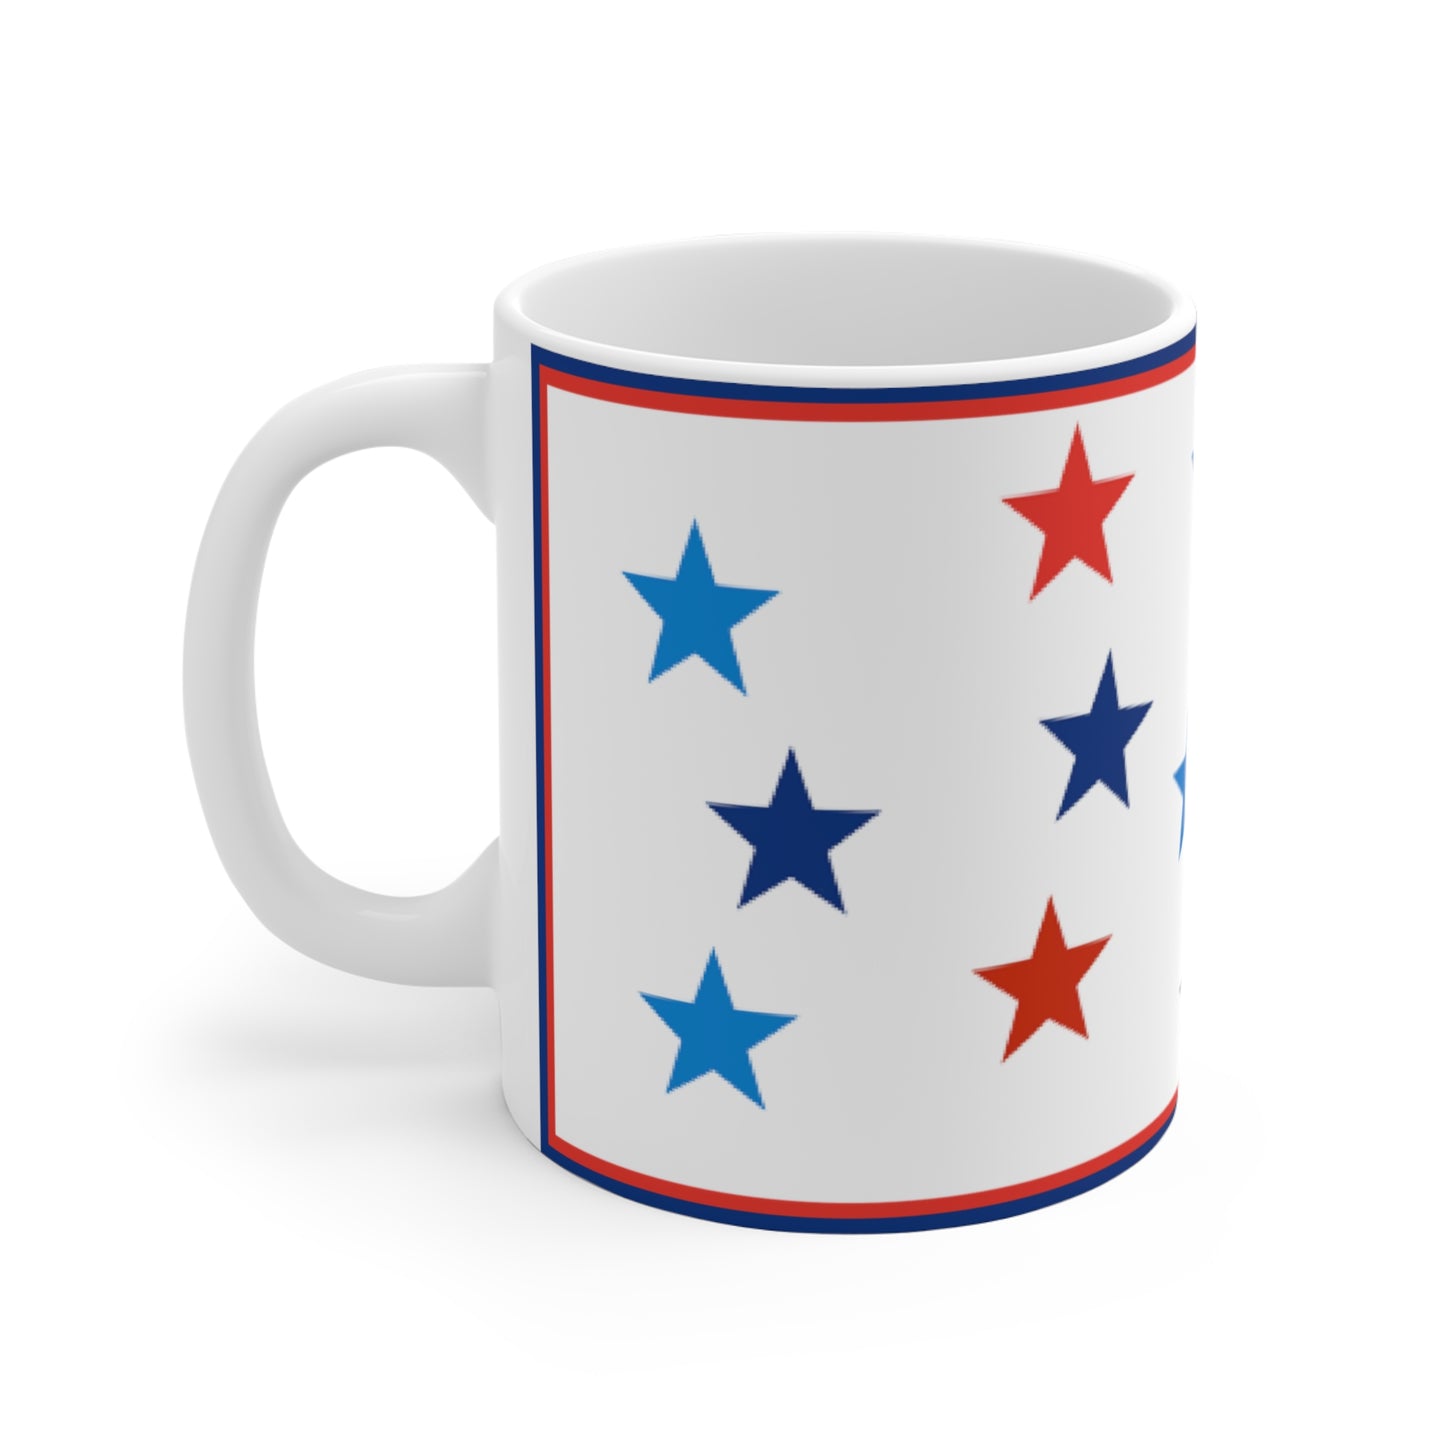 This Mug with Stars: Blue and Red on White; Ceramic; 11 oz. by Printify features a pattern of blue, red, and navy stars, bordered with red and blue lines near the handle—perfectly embodying the spirit of a patriotic mug.